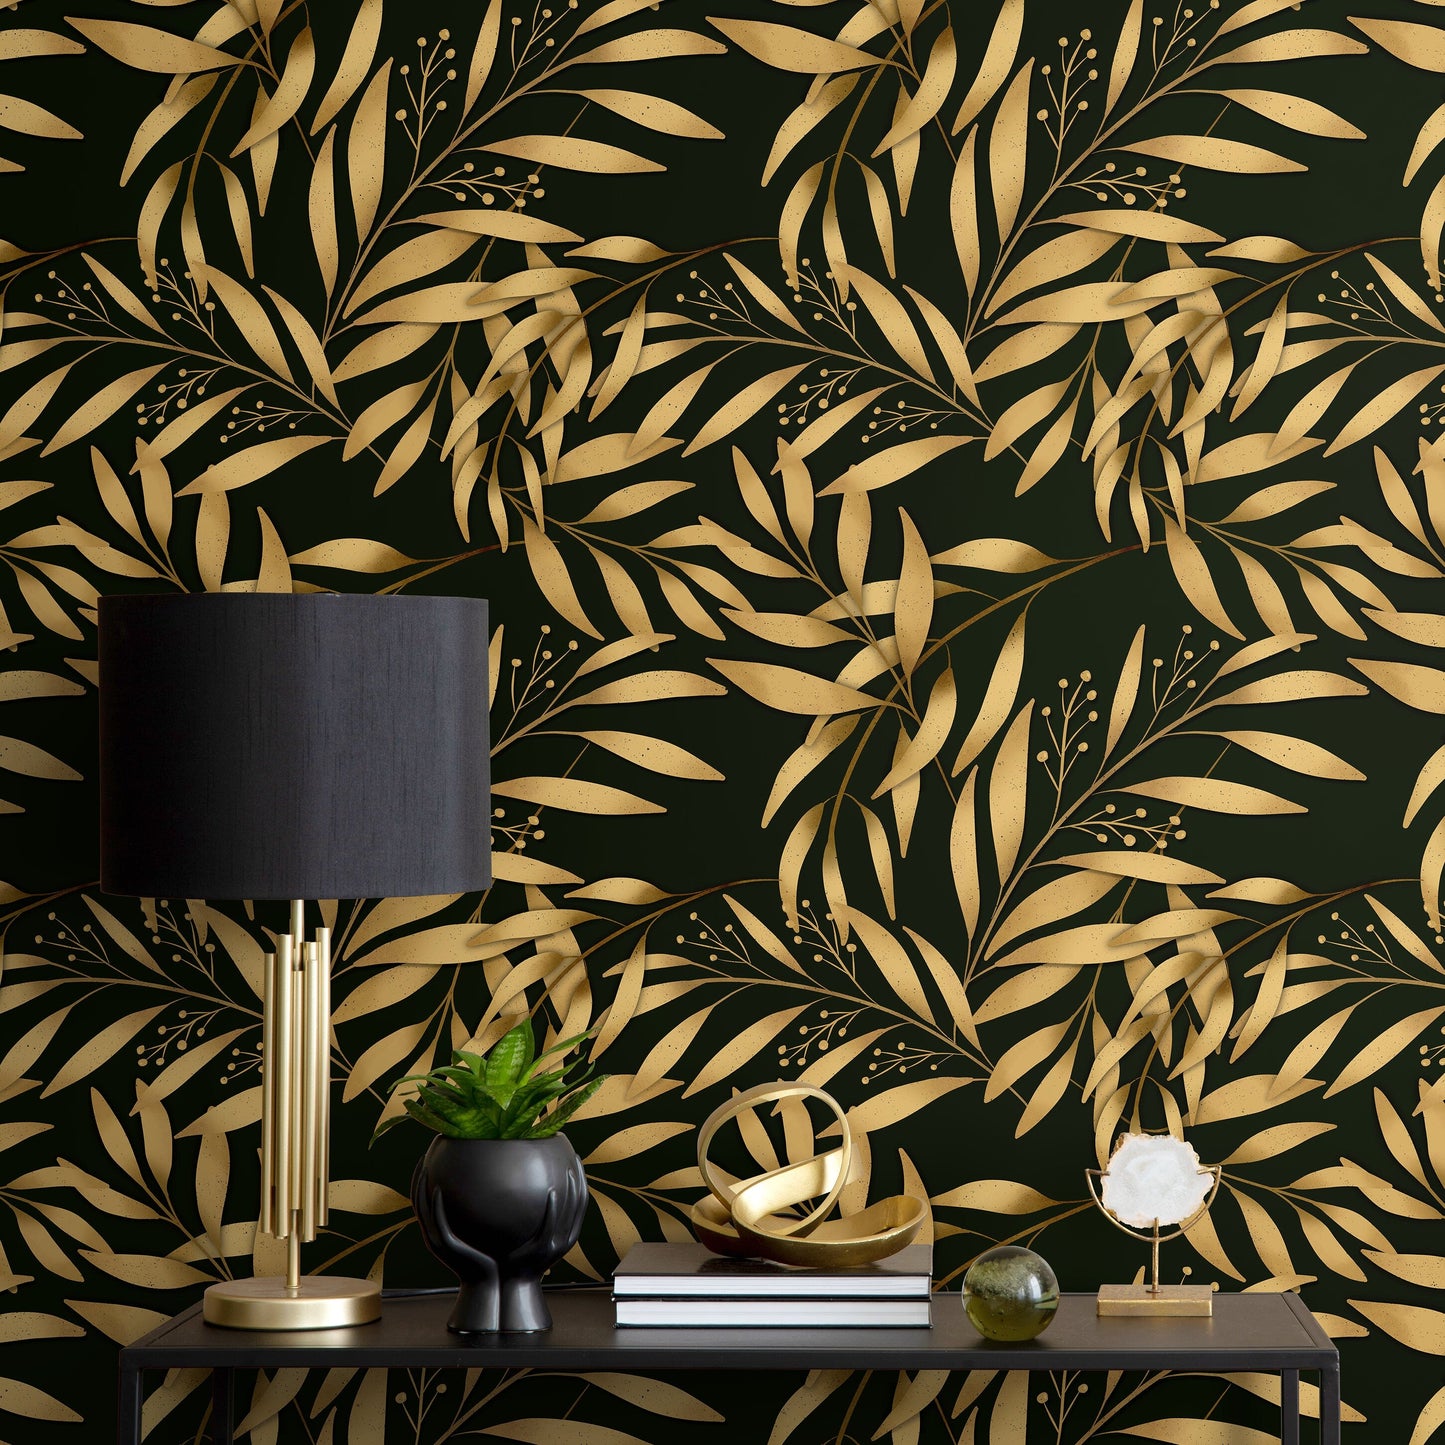 Golden Leaves Wallpaper Removable Wallpaper Peel and Stick Traditional Wallpaper Botanical Wallpaper Home Decor Printable Wall Art - X127